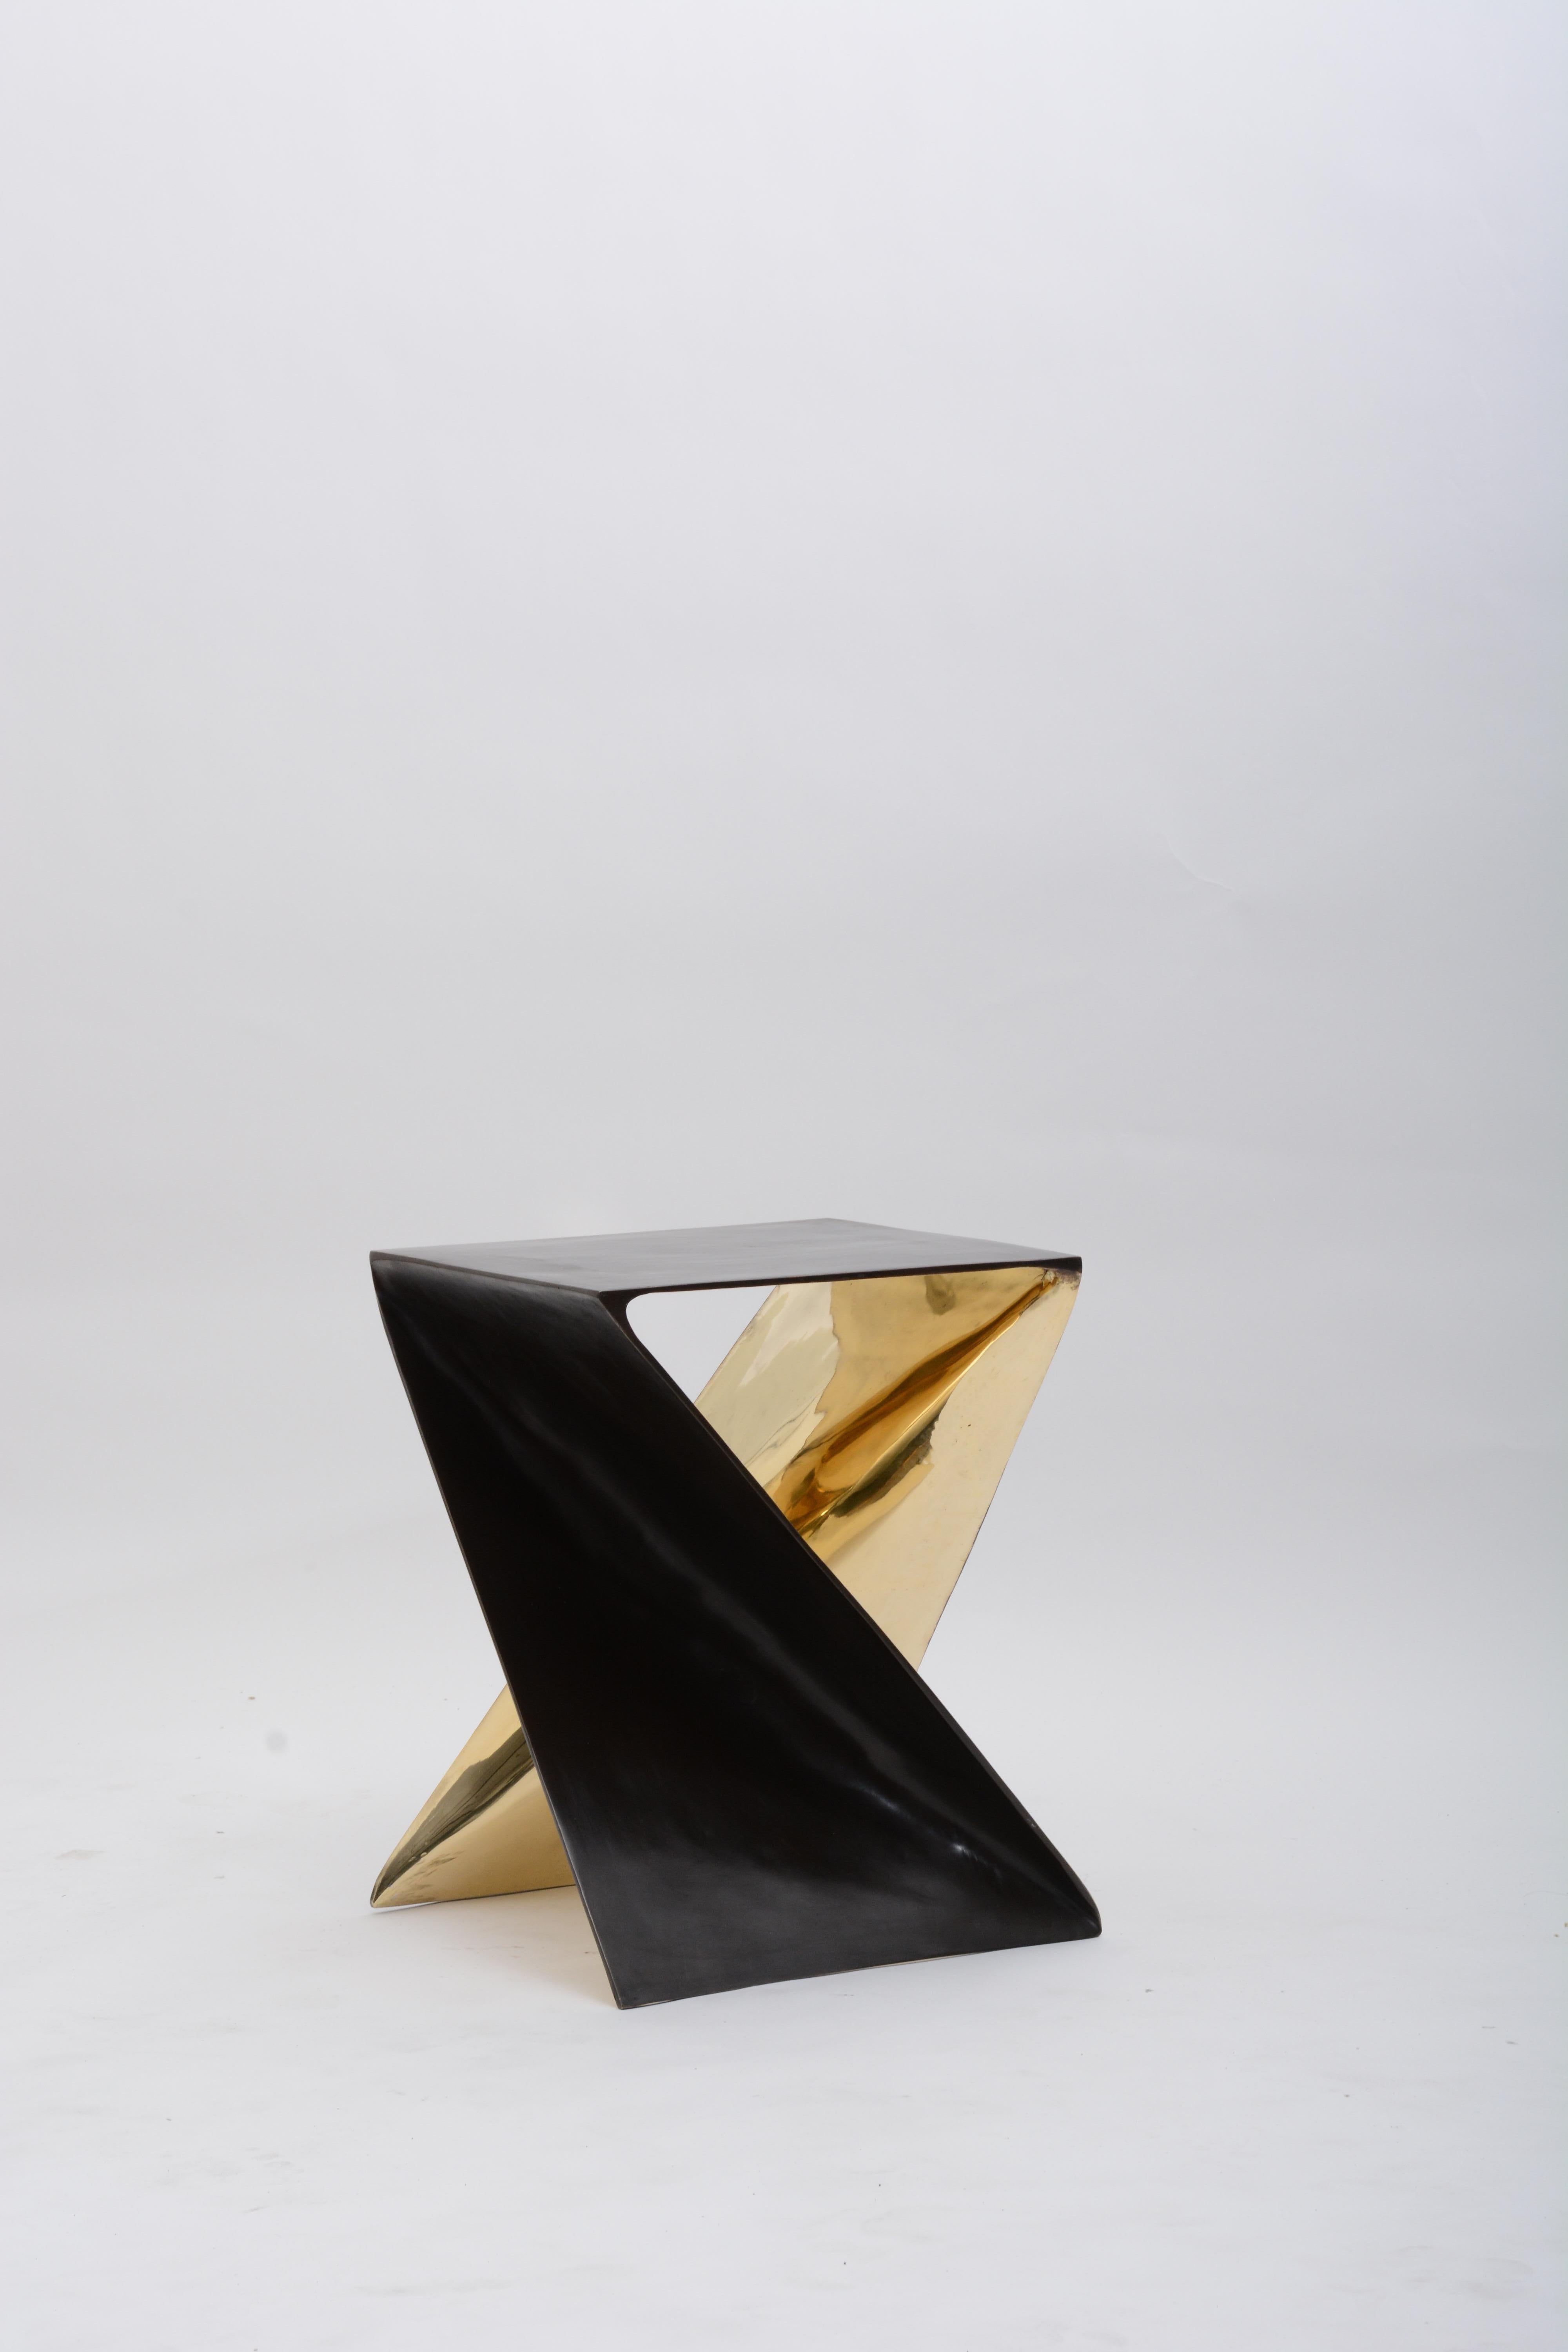 Bronze Contemporary Sculptural Sancho Stool by Elan Atelier

Sancho stool is a single piece of cast bronze with alternating dark bronze and gold bronze interior finish. 

Description/
Bronze side table produced using the superior lost wax bronze